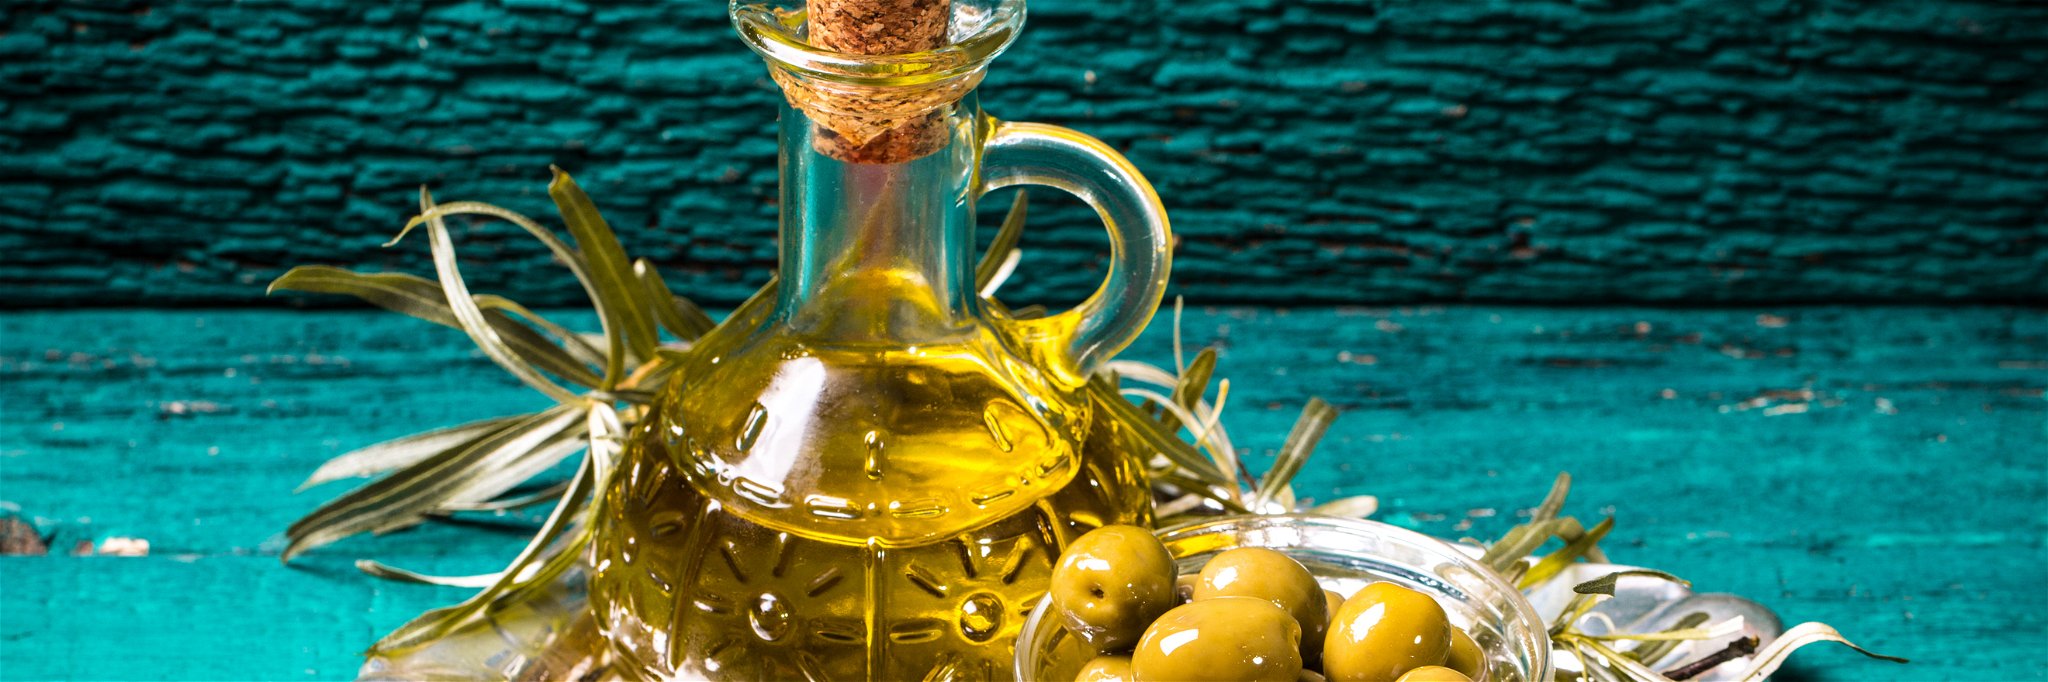 Extra&nbsp;virgin olive oil&nbsp;is&nbsp;often considered to be the healthiest type of olive oil